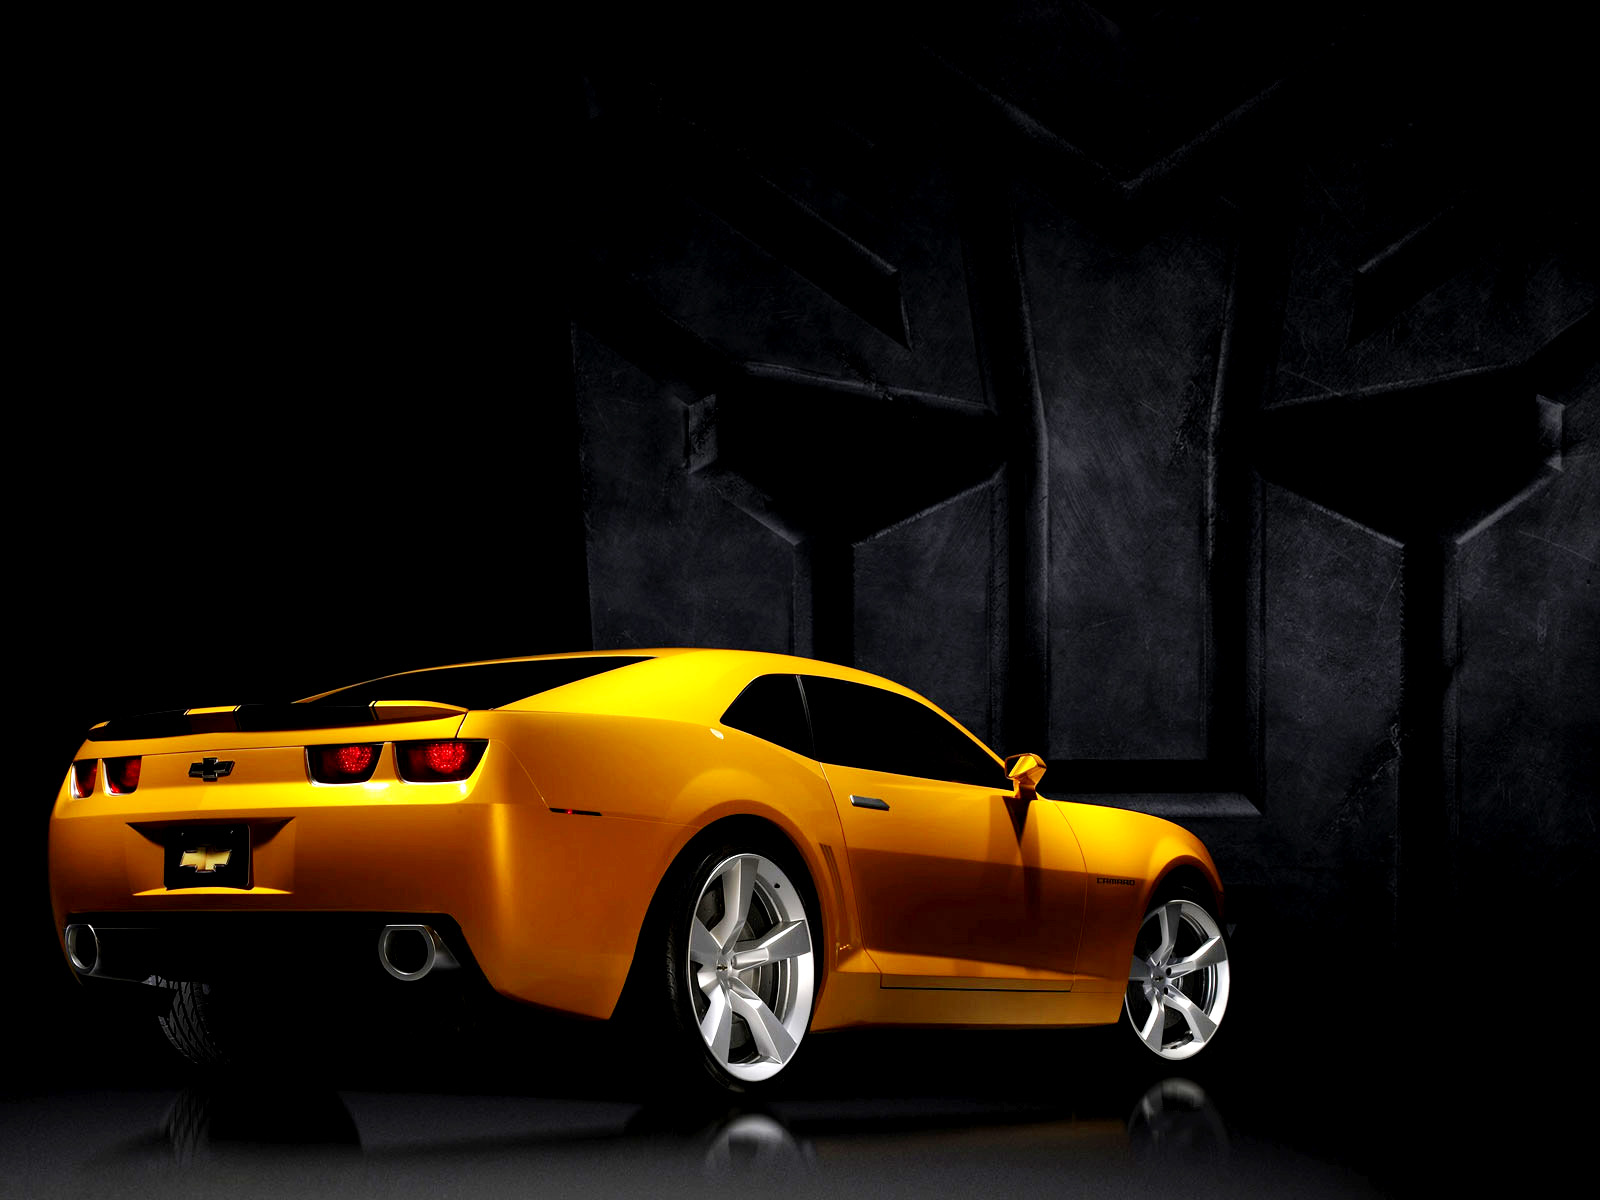 Bumblebee Transformers HD Wallpapers HQ Wallpapers   Free Wallpapers